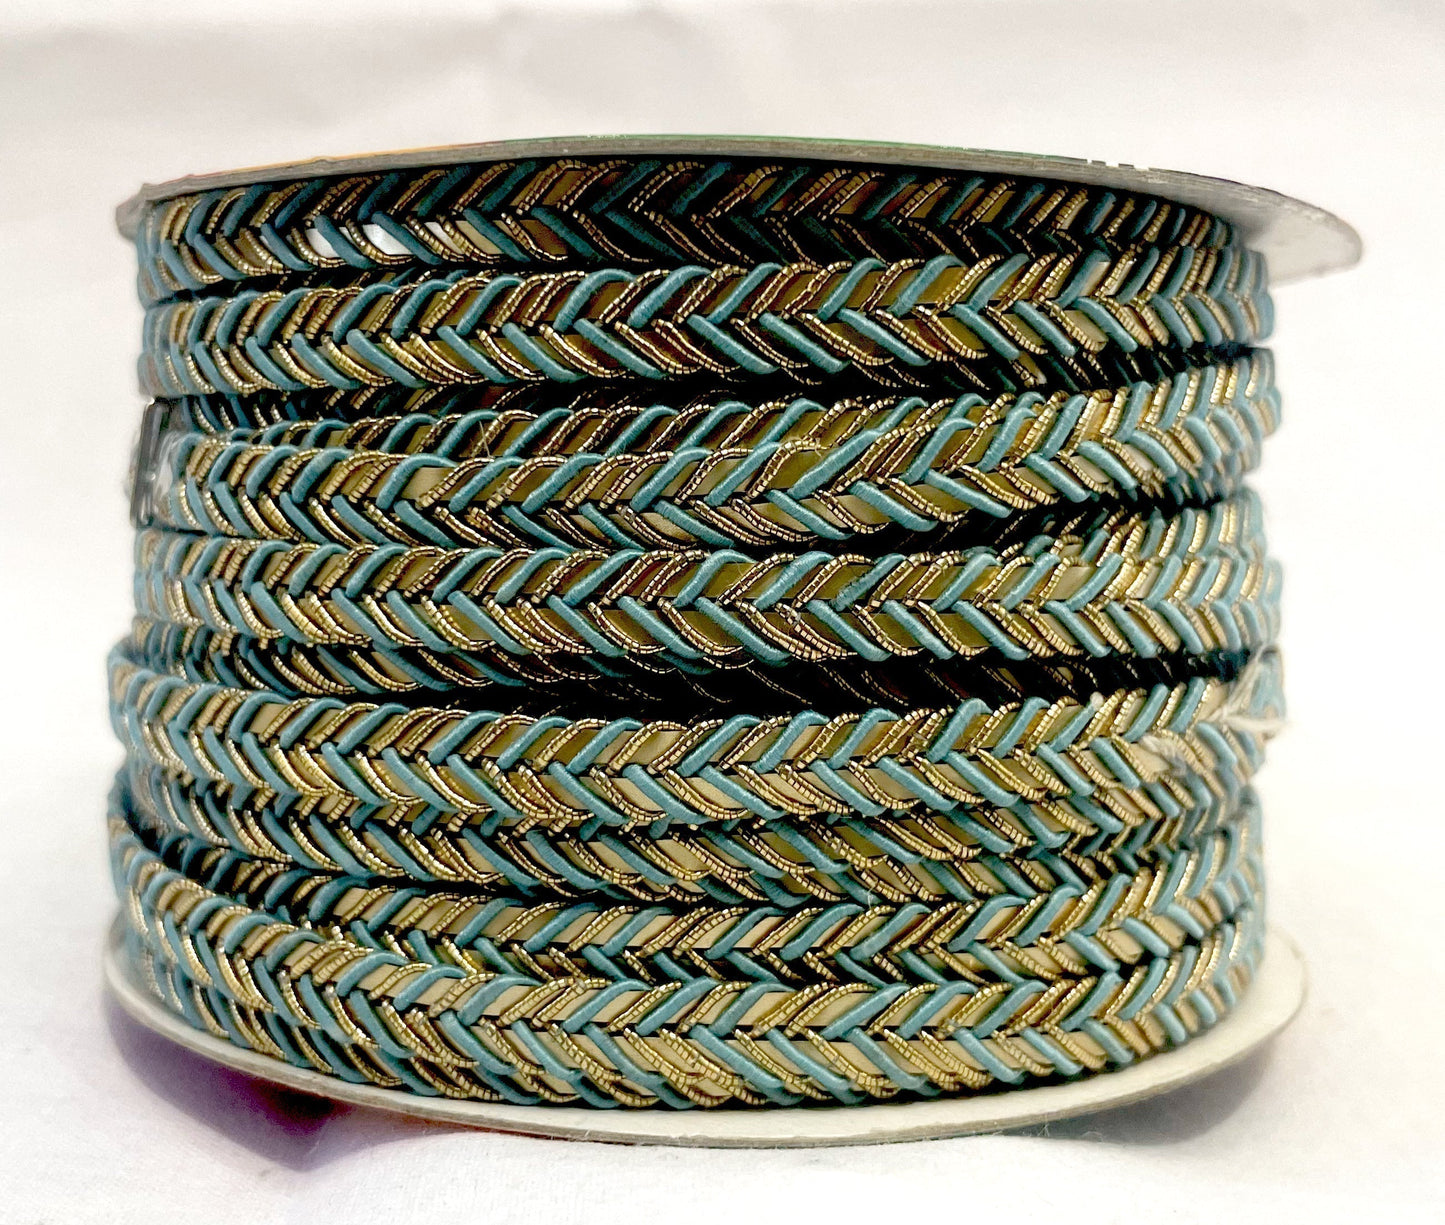 Golden Braid Border, Teal And Golden,  Laces for Dress, Home Décor, Shoe, Bags, Hats, DIY, Handmade, 0.2 inch Broad